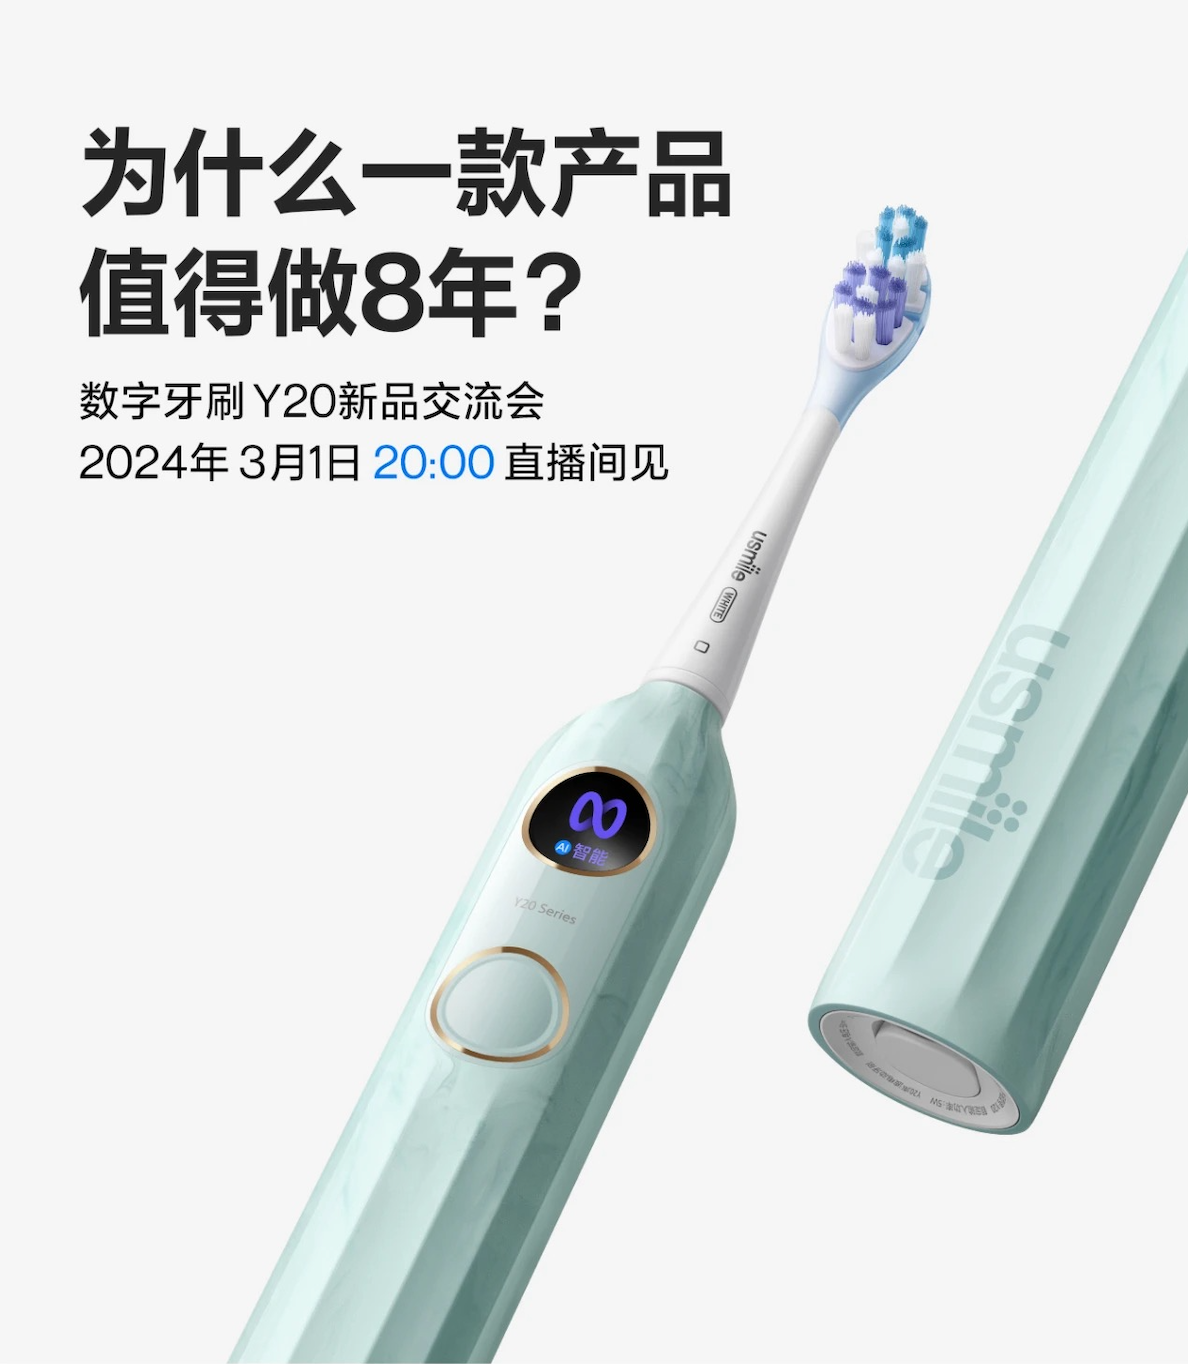 Chinese electric toothbrush brand Usmile releases new products quarterly, featuring new functions and colors. Image: Usmile